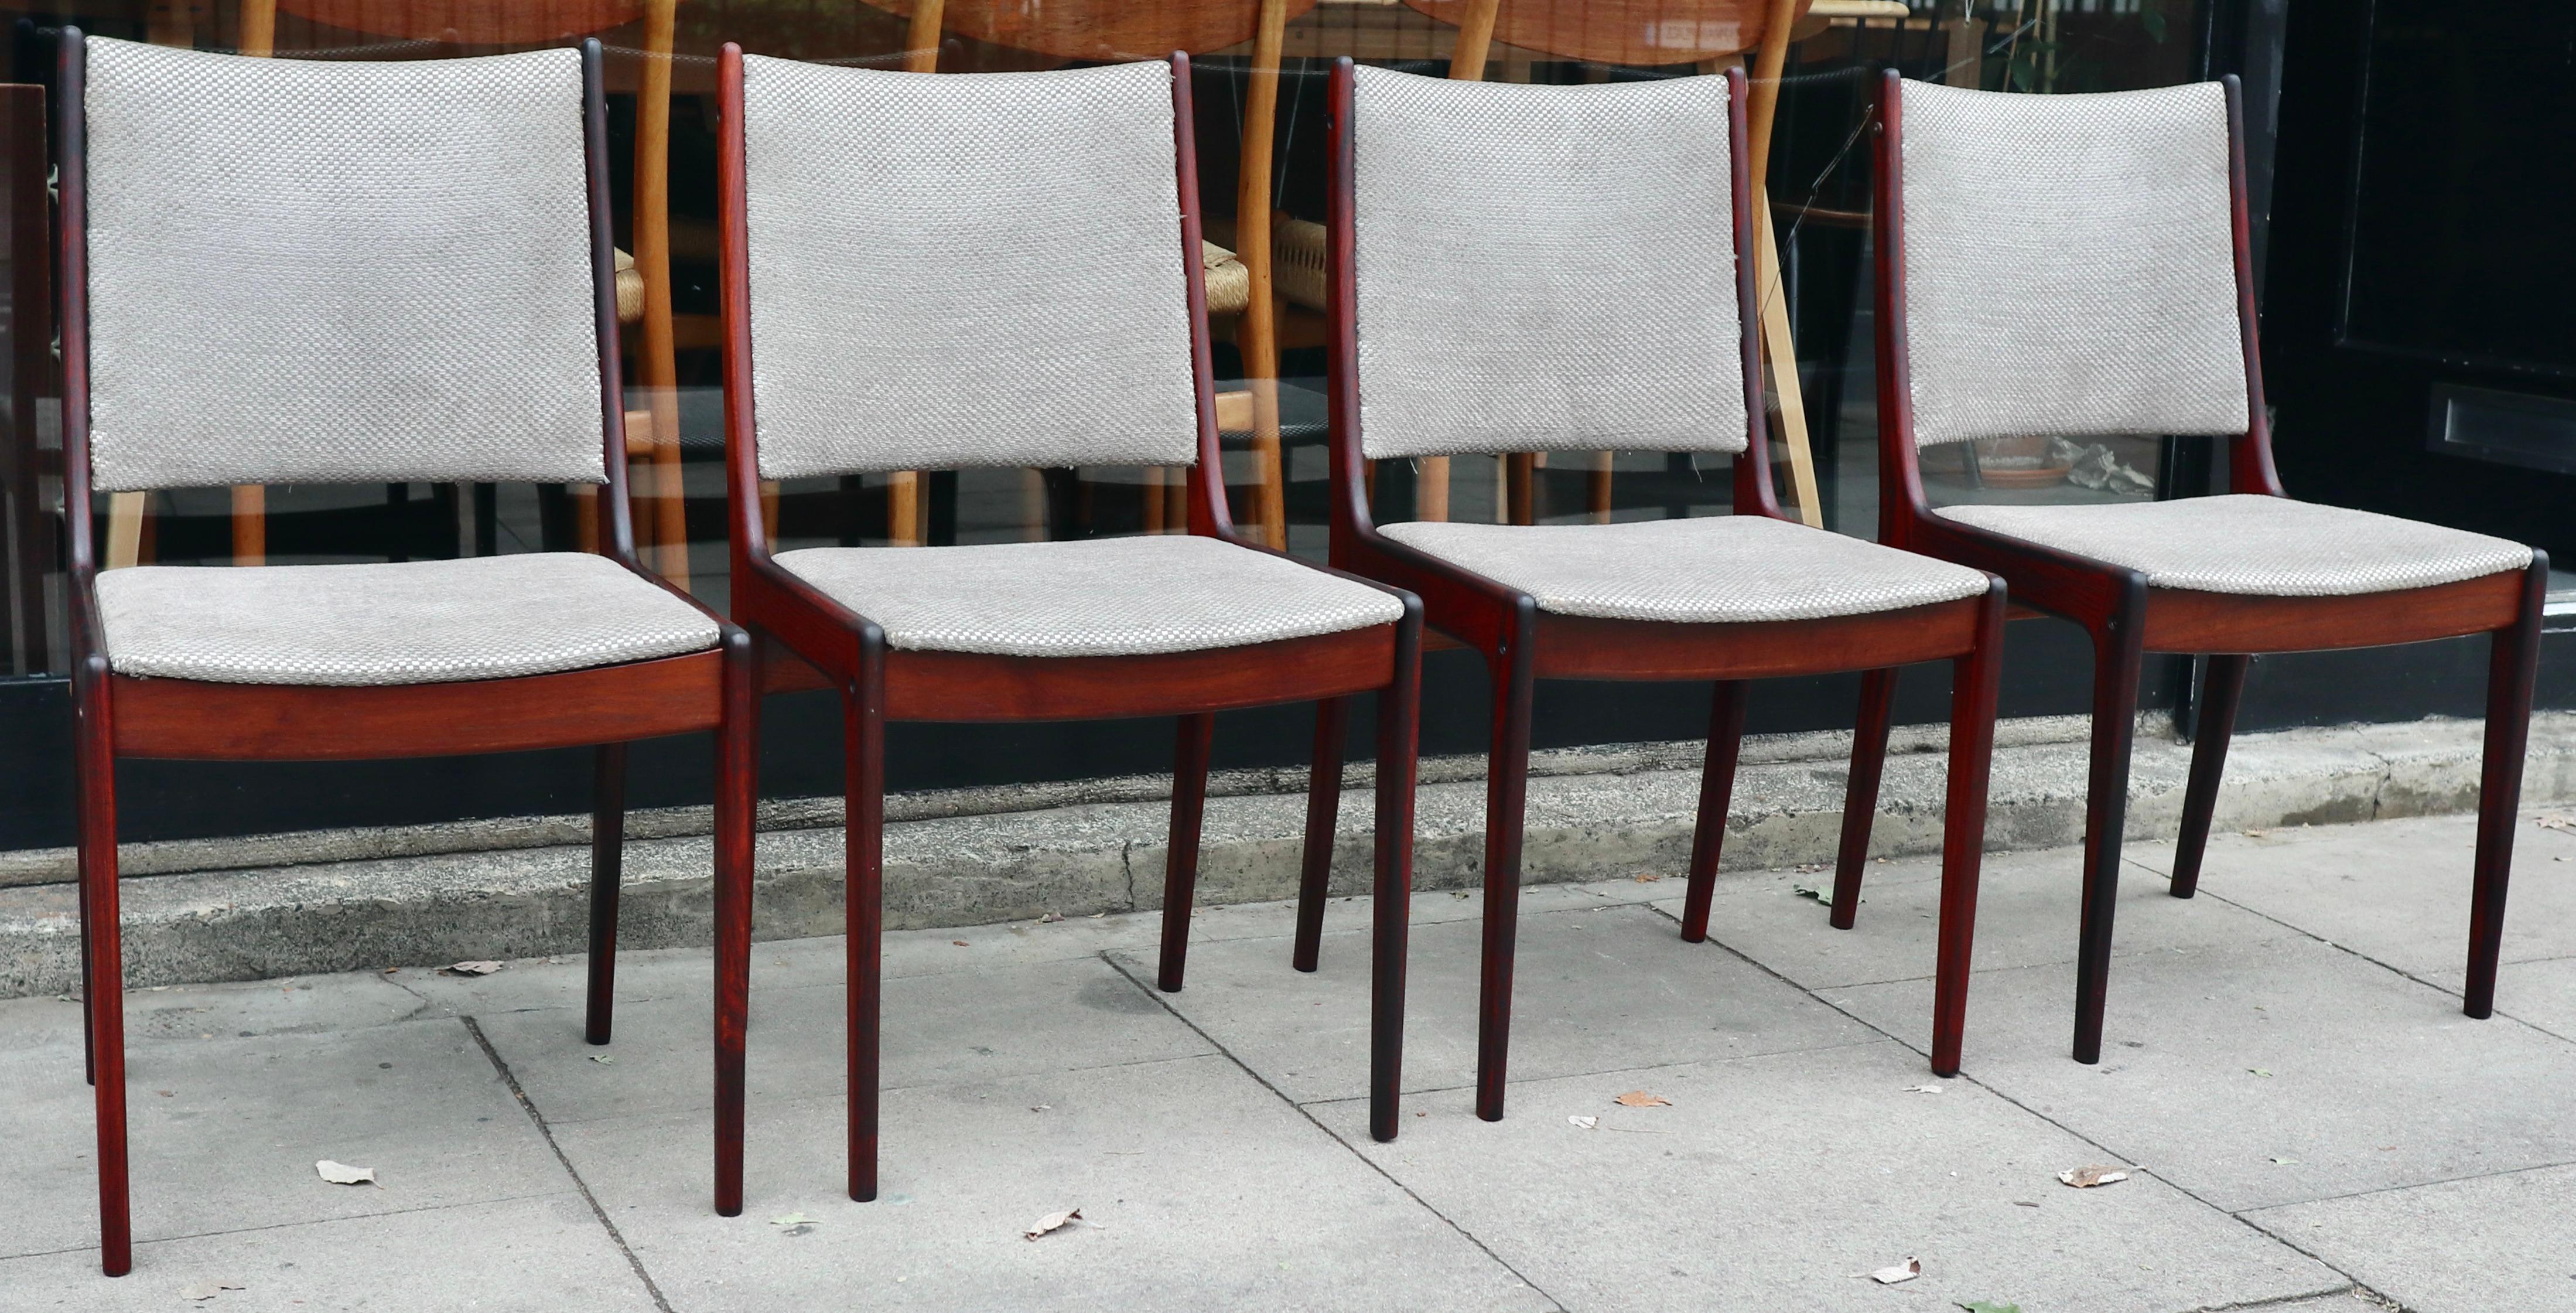 20th Century Four rosewood dining Chairs by Johannes Andersen for Uldum Møbelfabrik 1960s For Sale